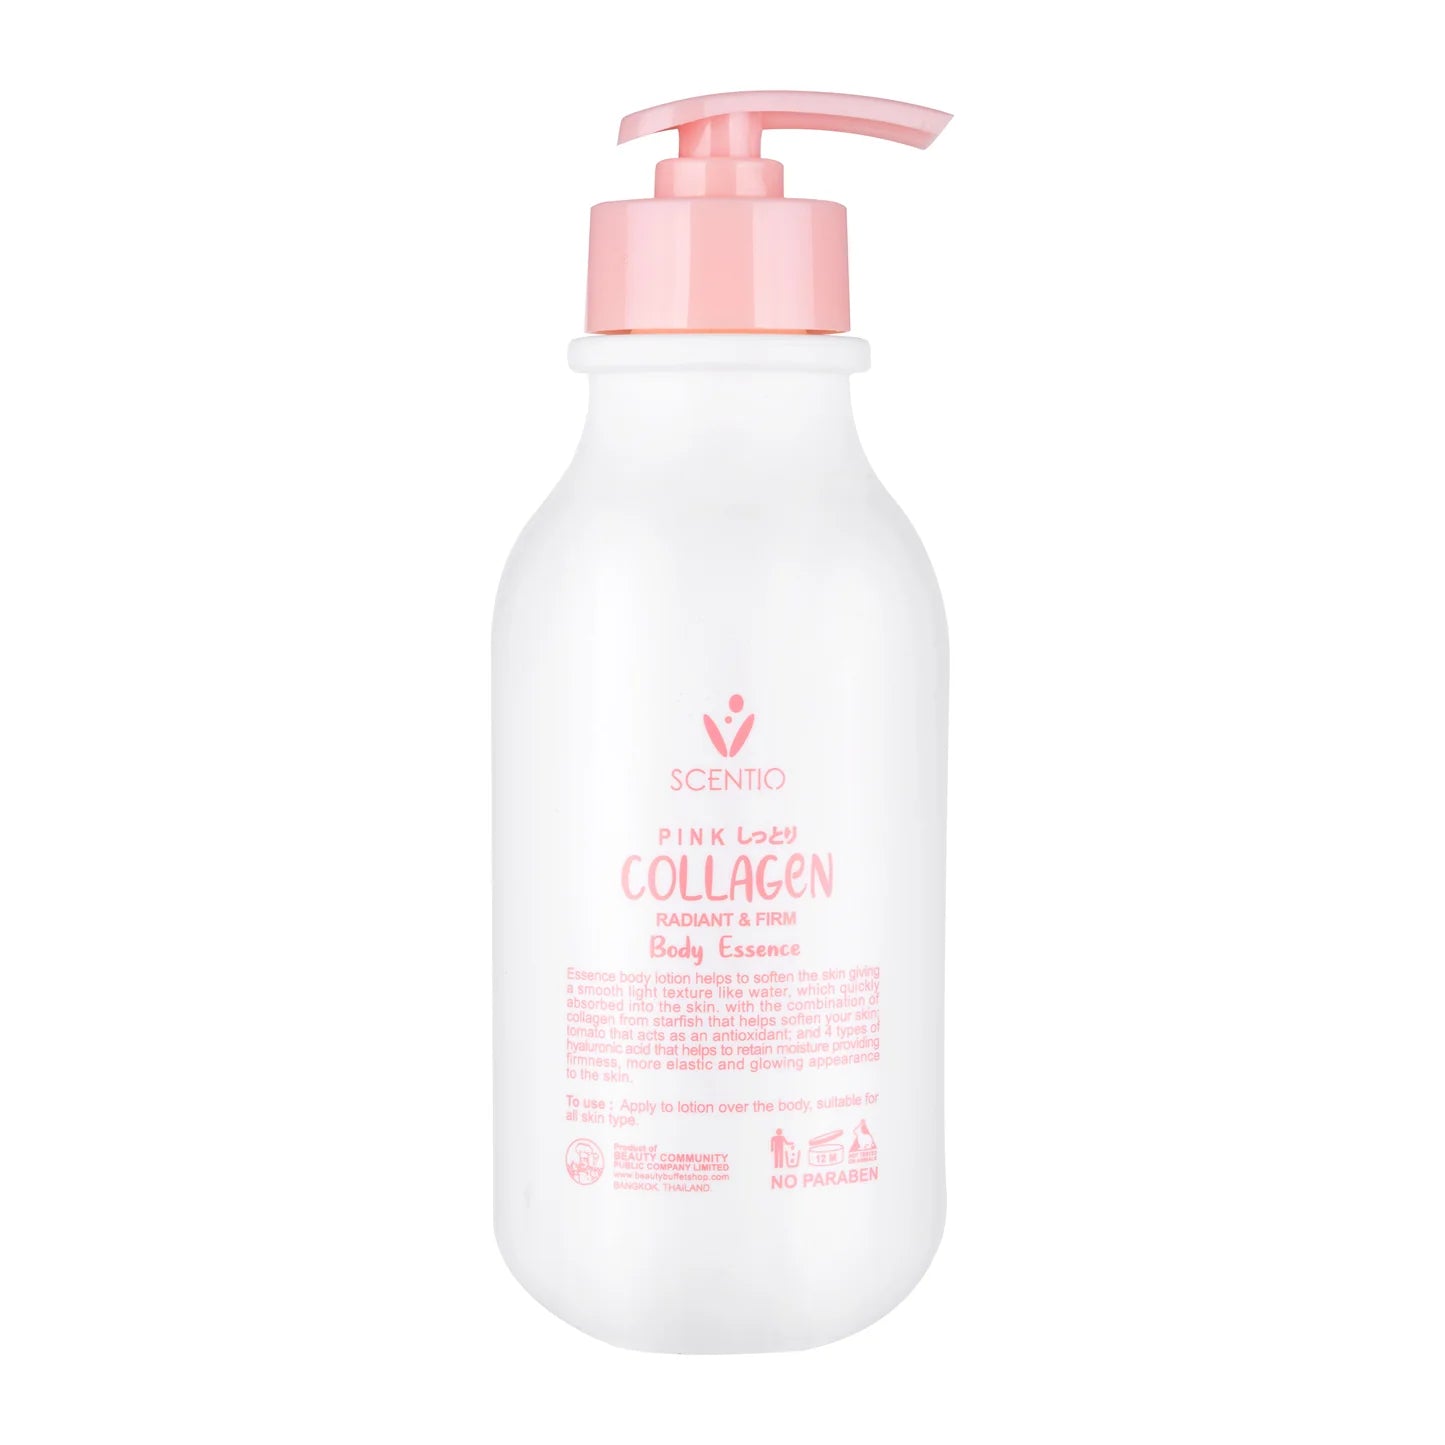 Beauty Buffet Scentio Pink Collagen Radiant & Firm Body Essence & Body Lotion 350ml